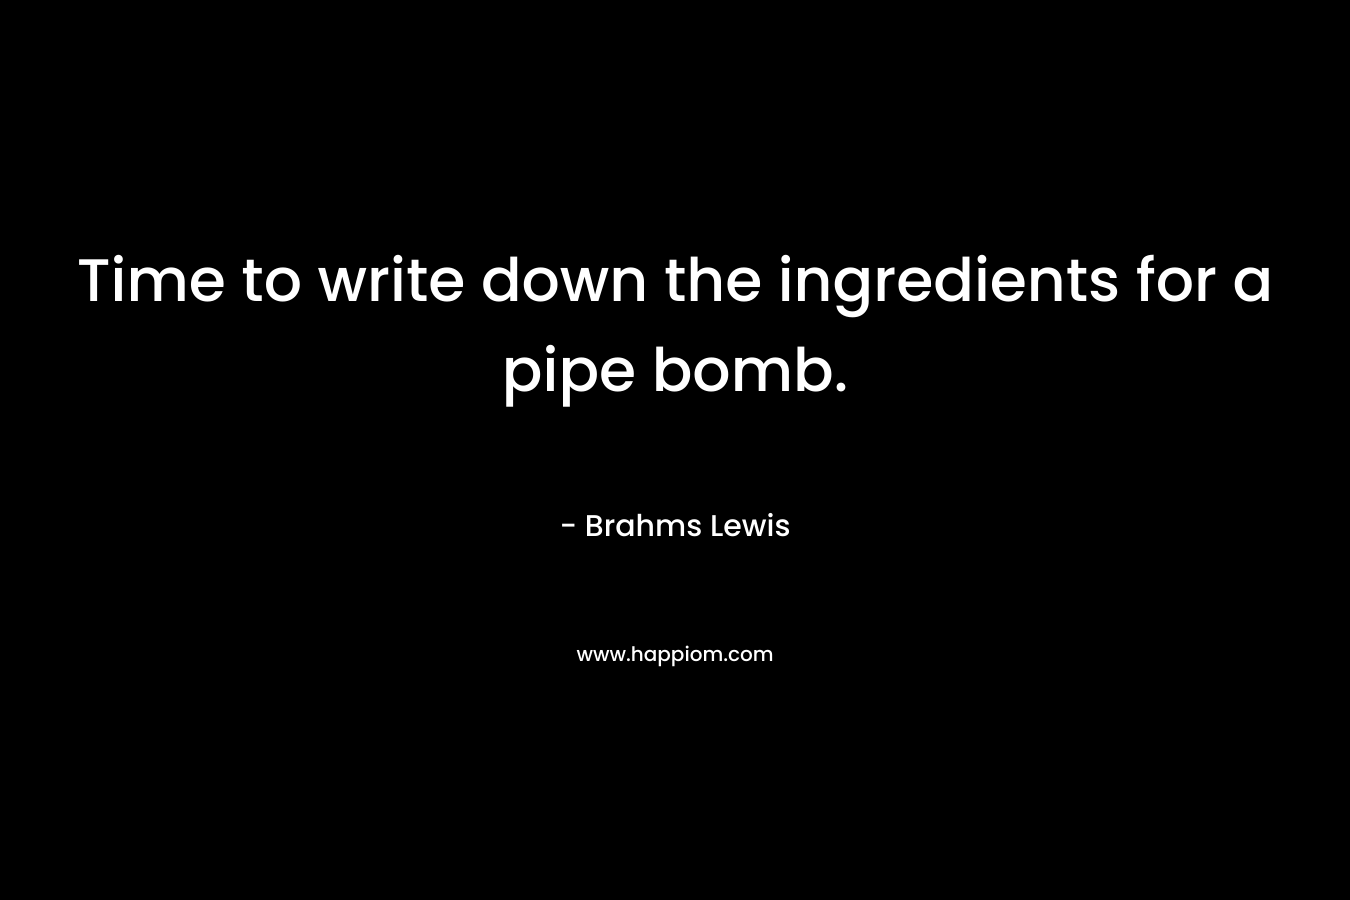 Time to write down the ingredients for a pipe bomb.